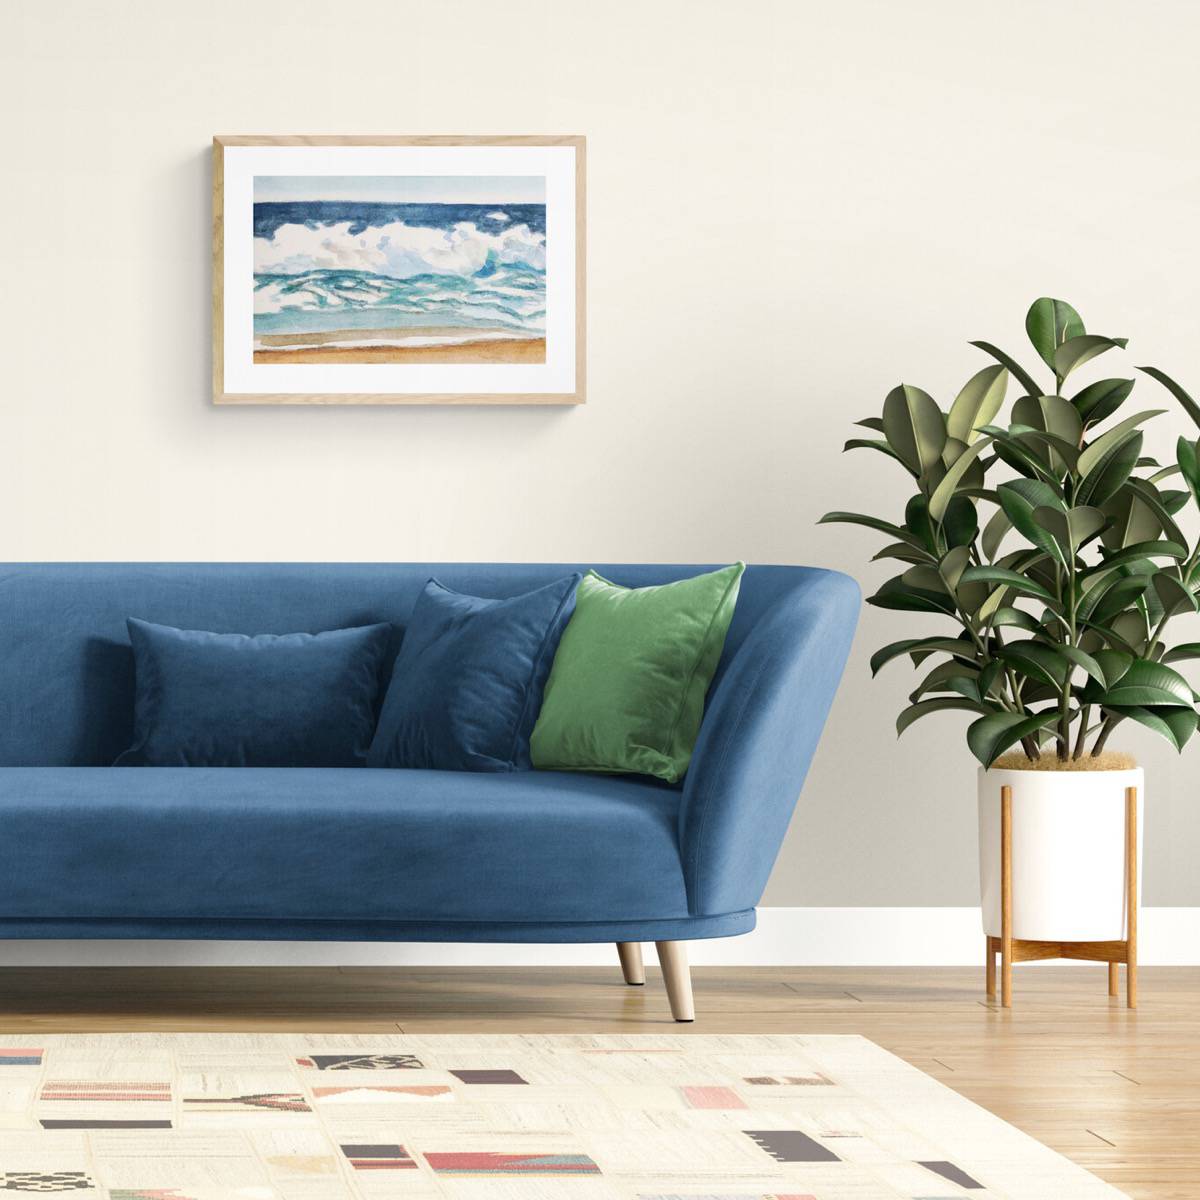 A framed painting of a seascape in a living room above a blue couch next to a plant.